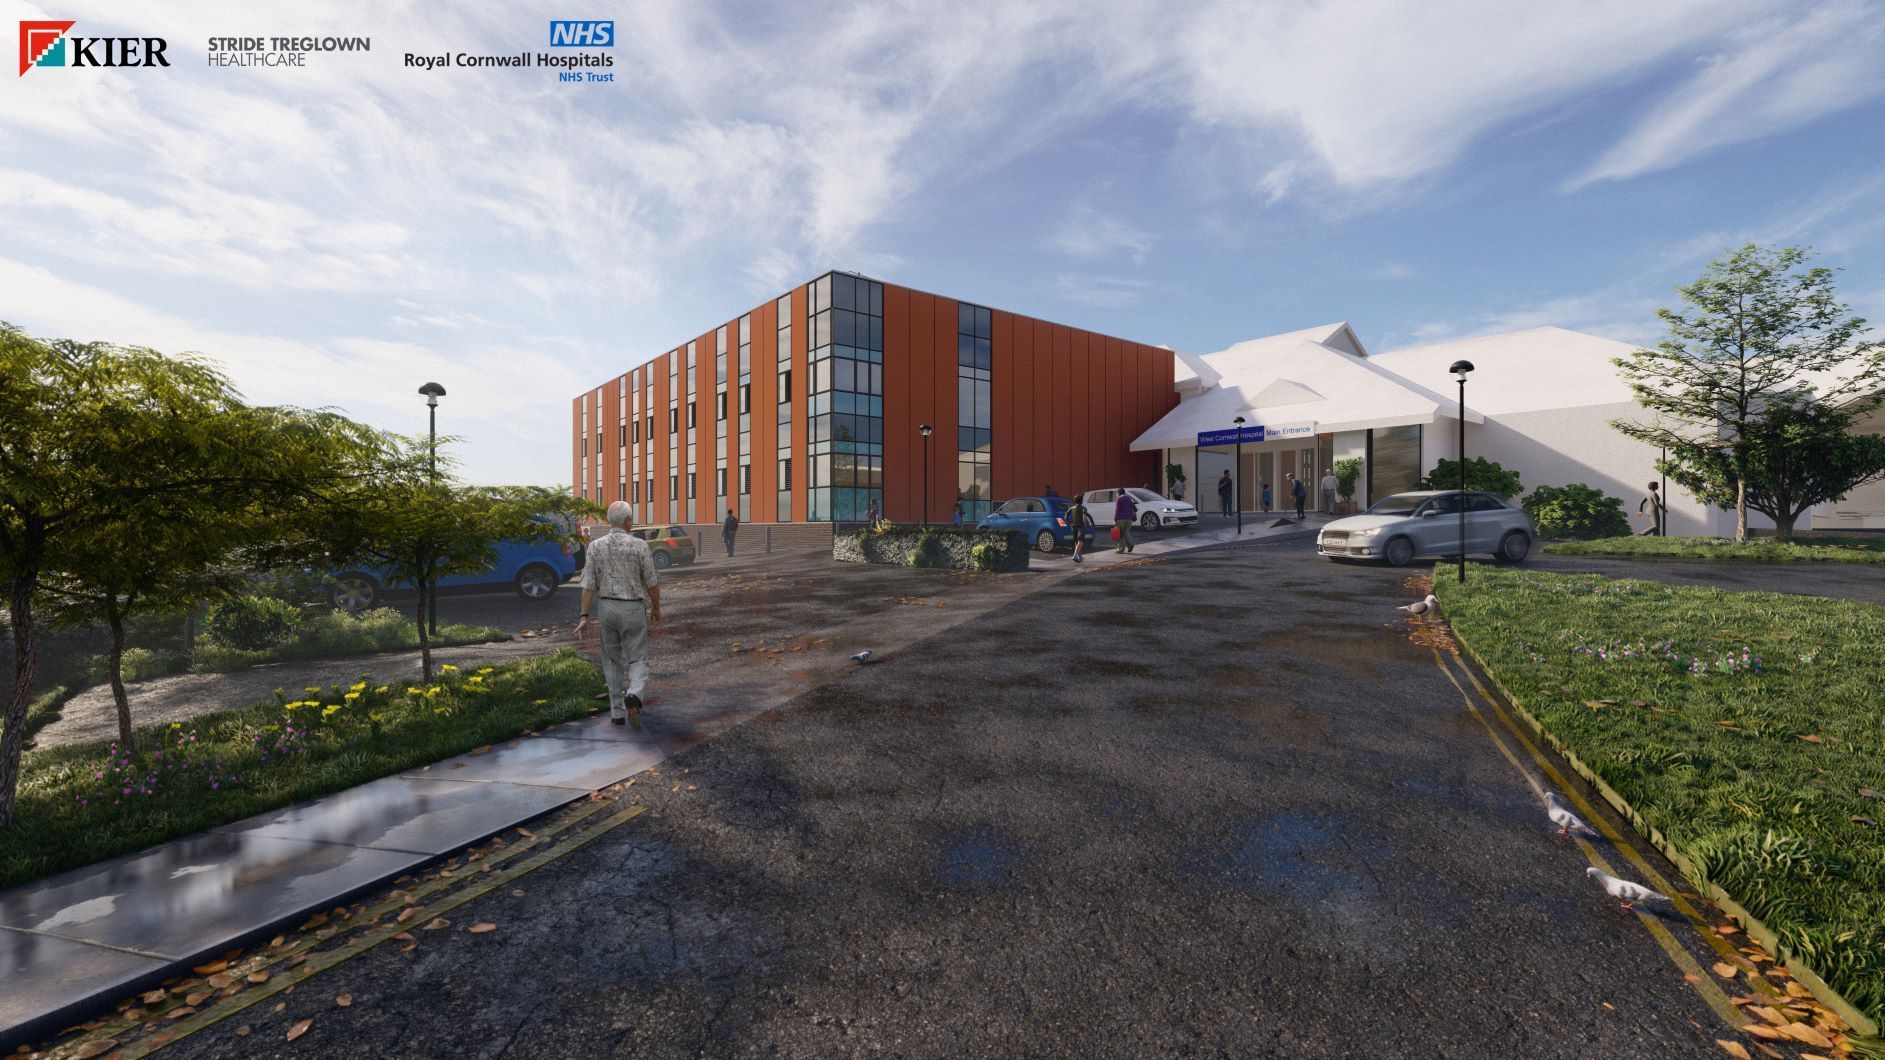 Artist\s impression of the proposed new outpatient unit at West Cornwall Hospital